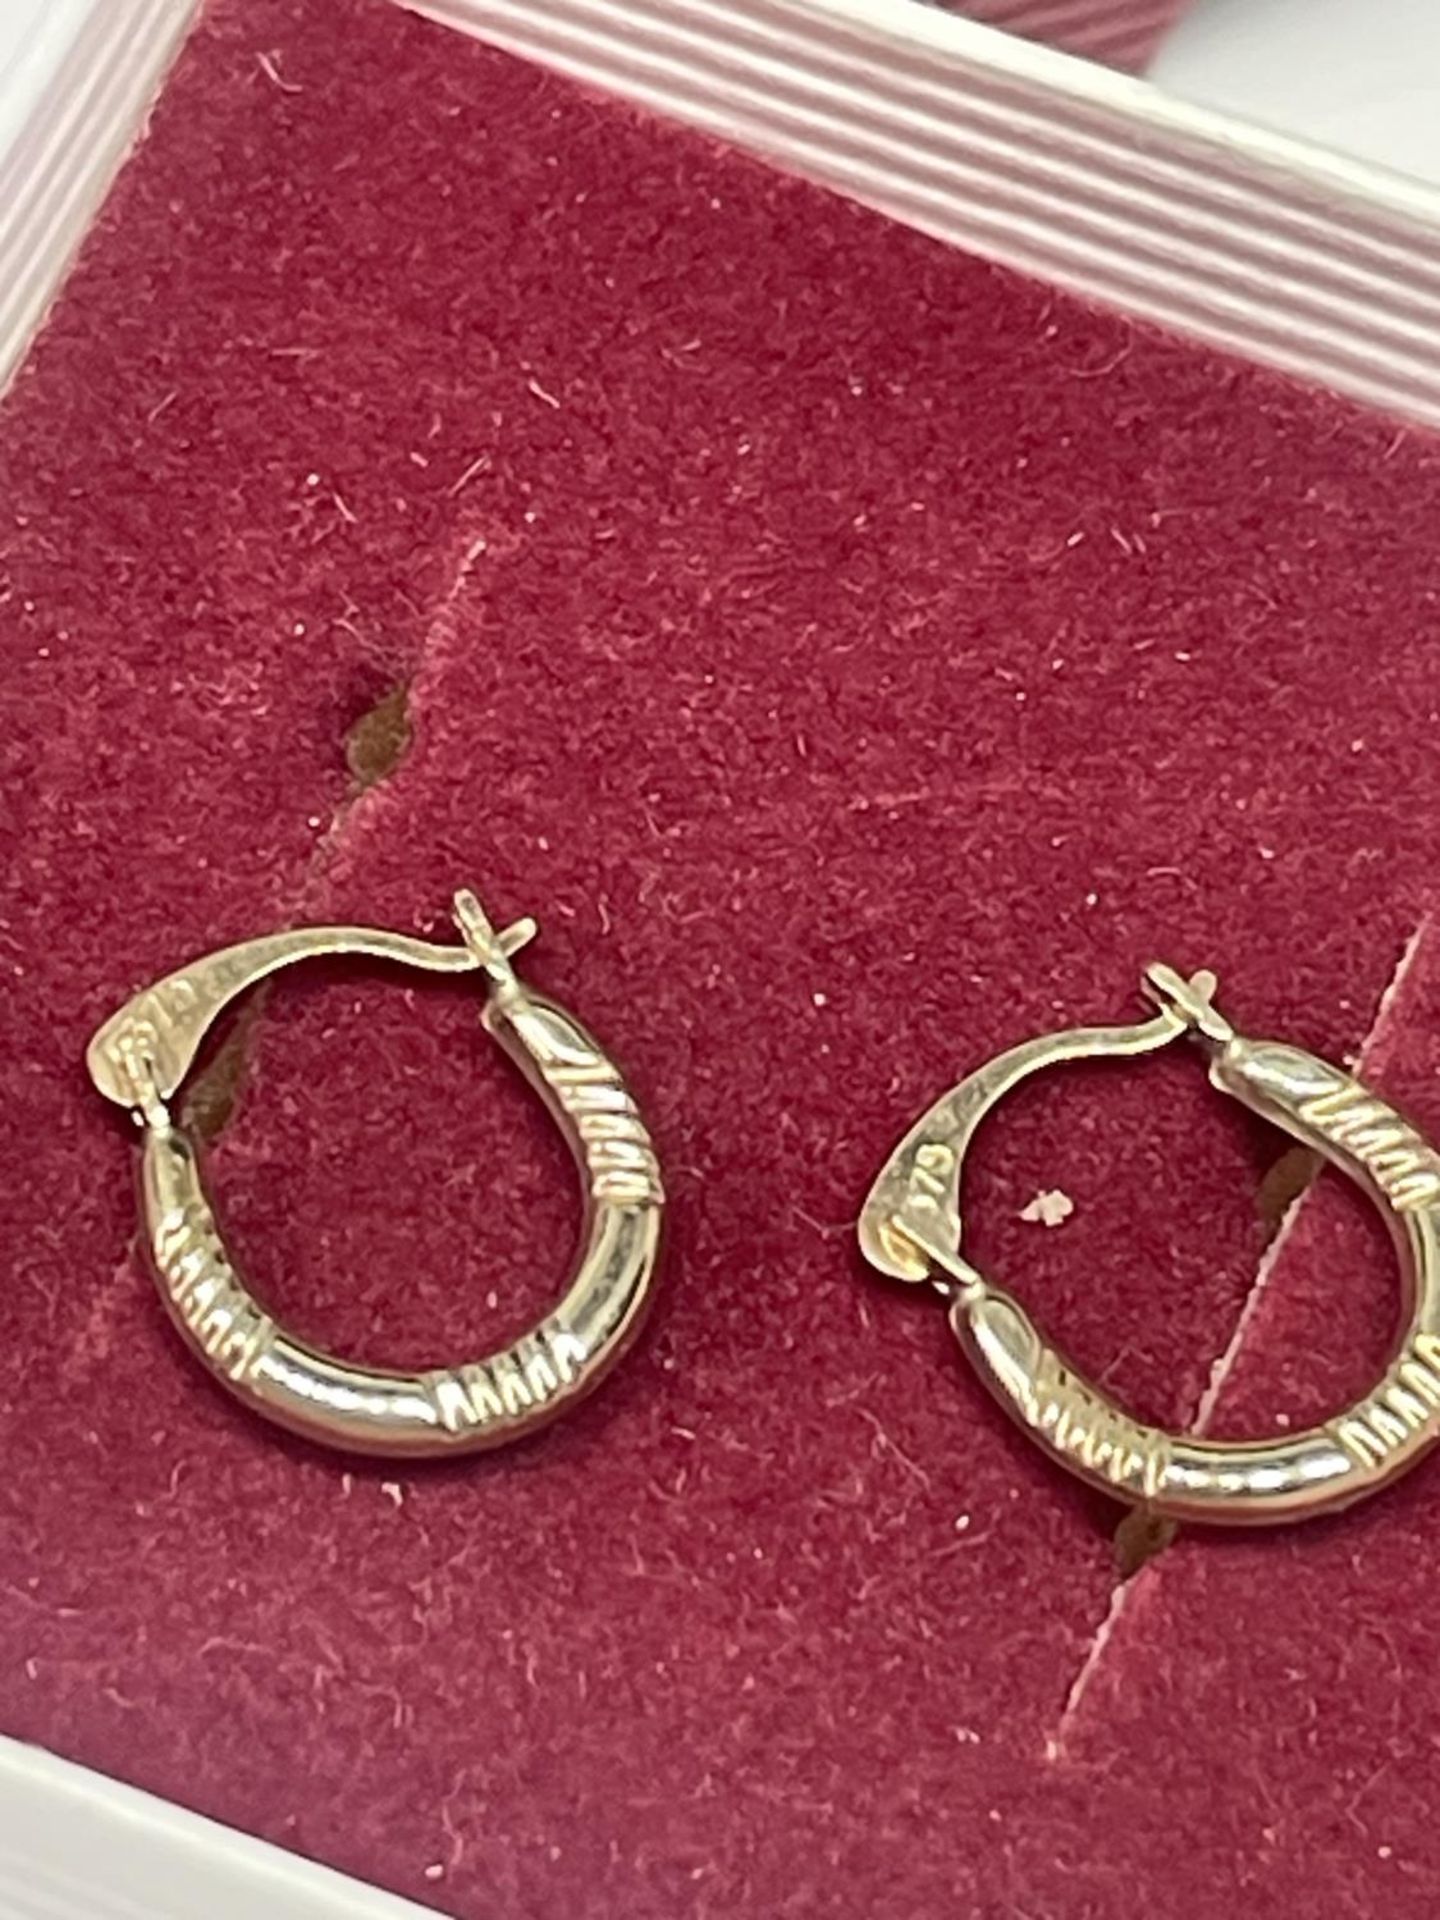 A PAIR OF 9 CARAT GOLD LOOP EARRINGS IN A PRESENTATION BOX - Image 2 of 3